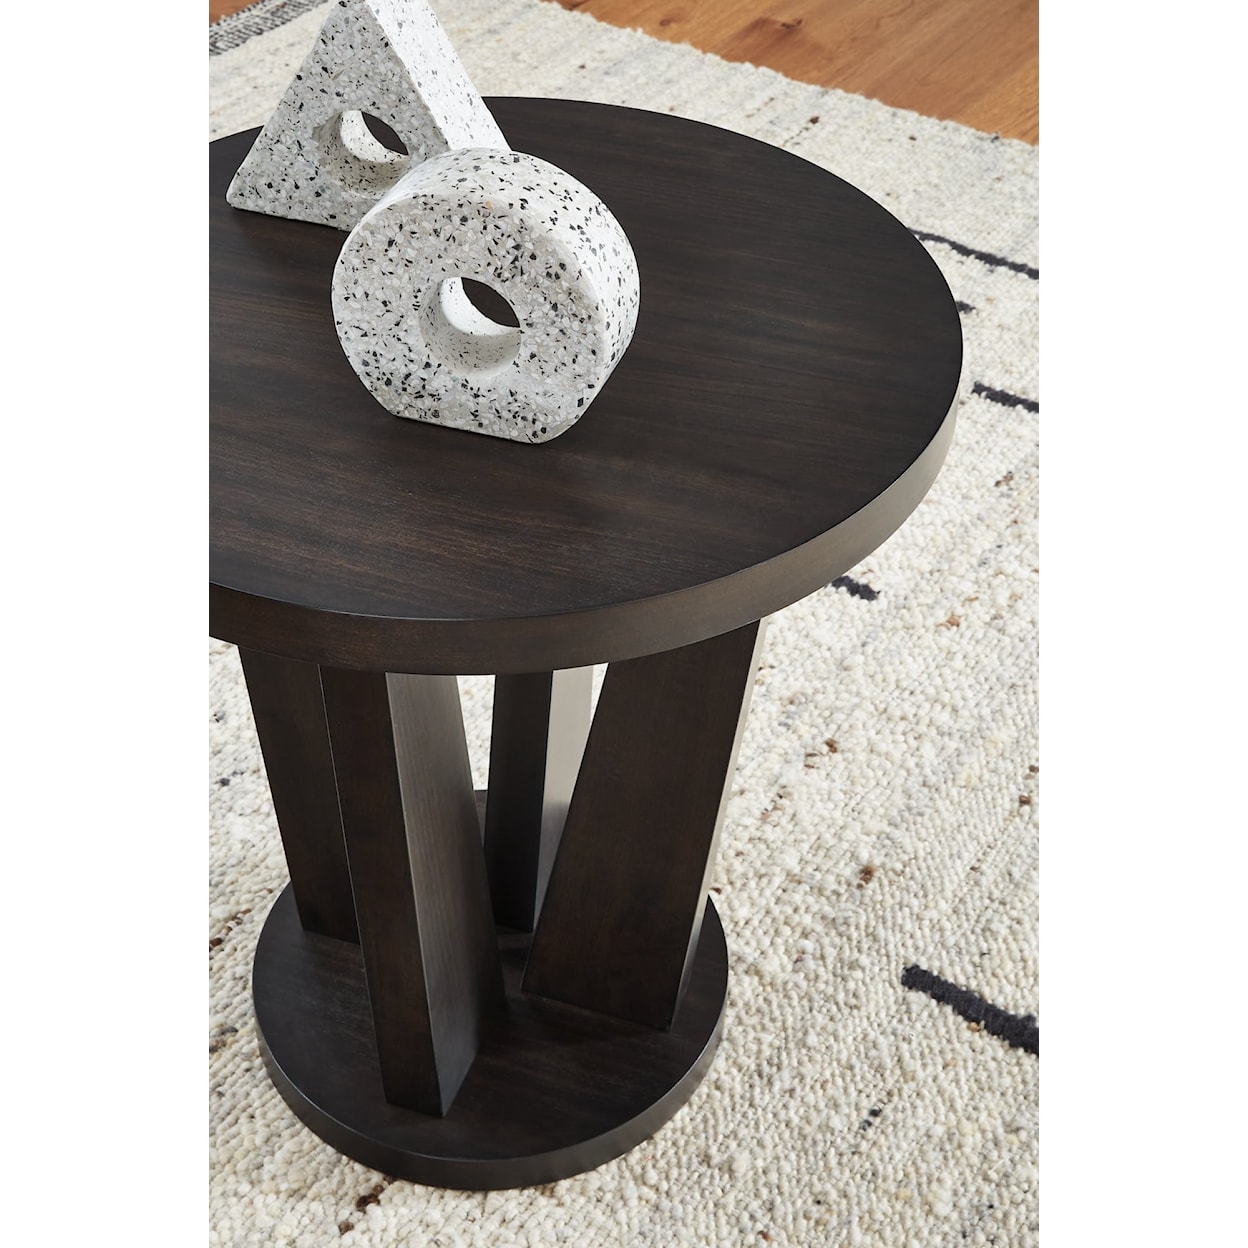 Signature Design Chasinfield Round End Table